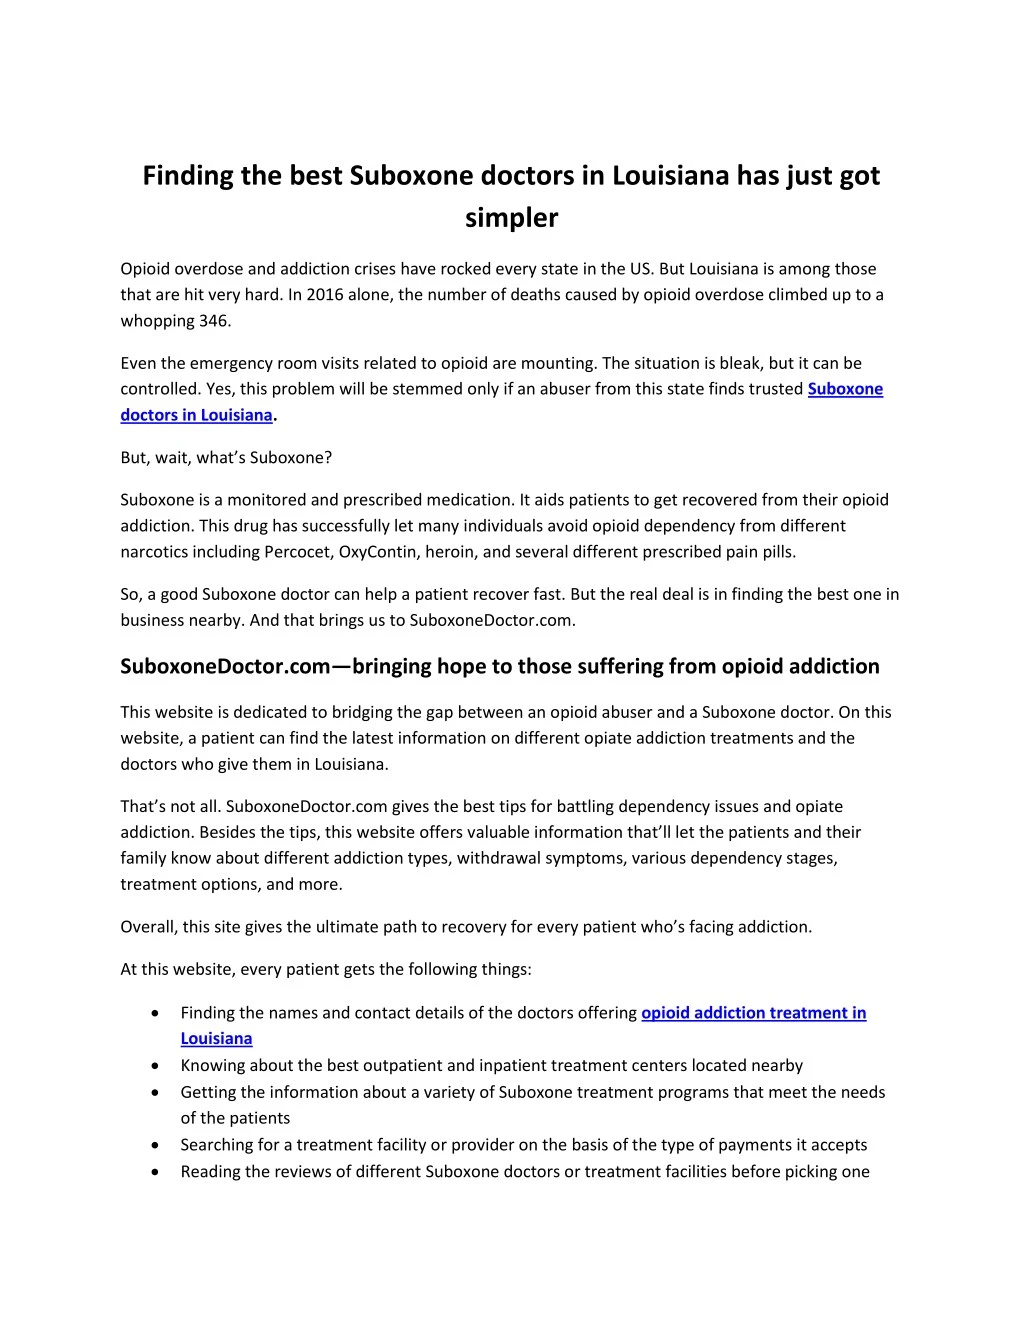 finding the best suboxone doctors in louisiana